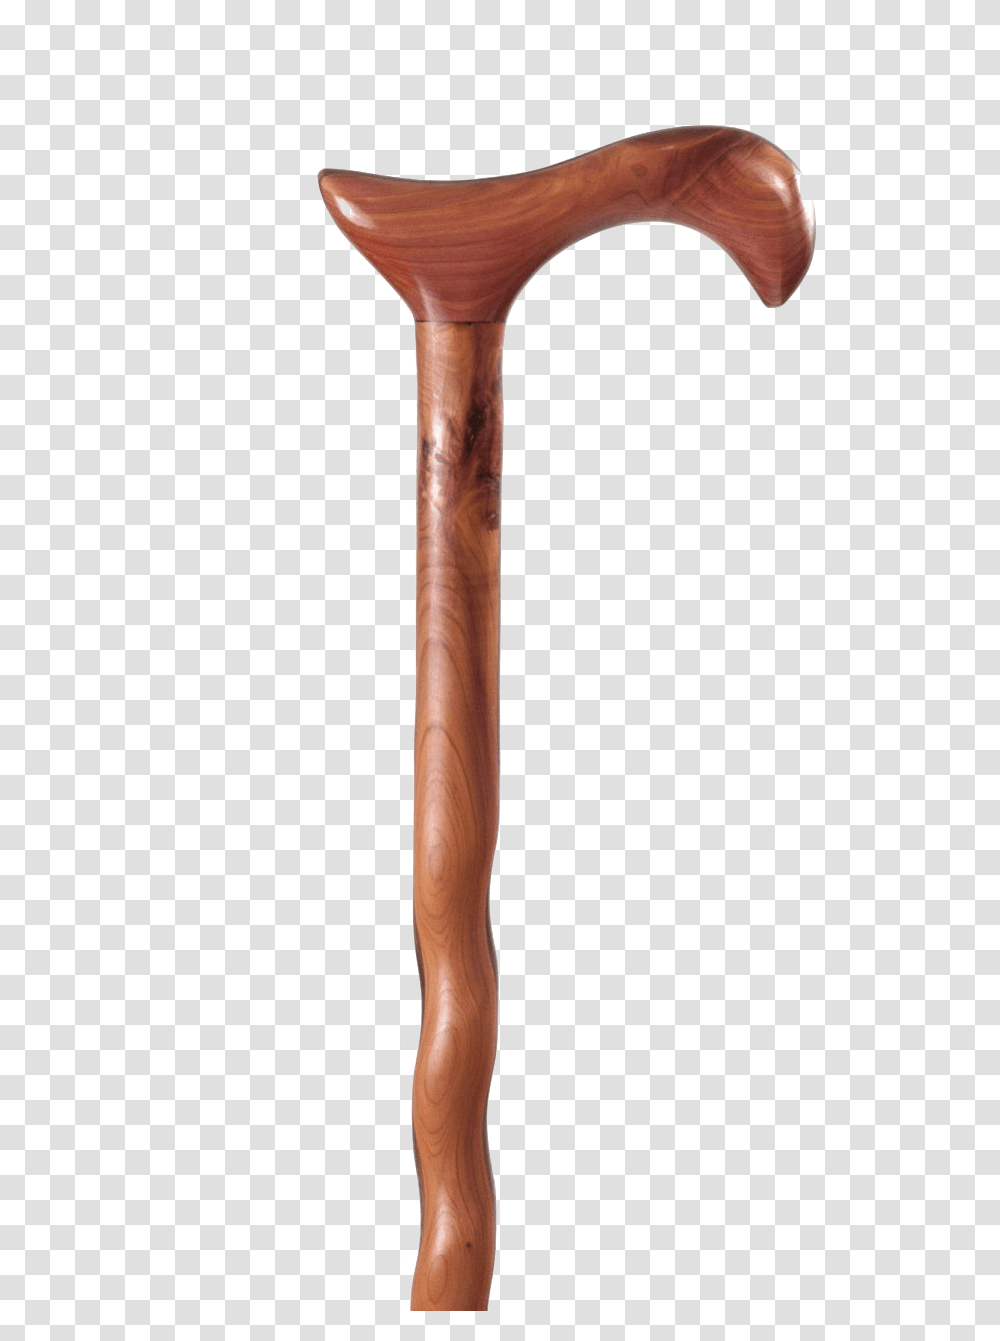 Cane Walking Stick Image Background Walking Cane, Axe, Tool, Sport, Sports Transparent Png